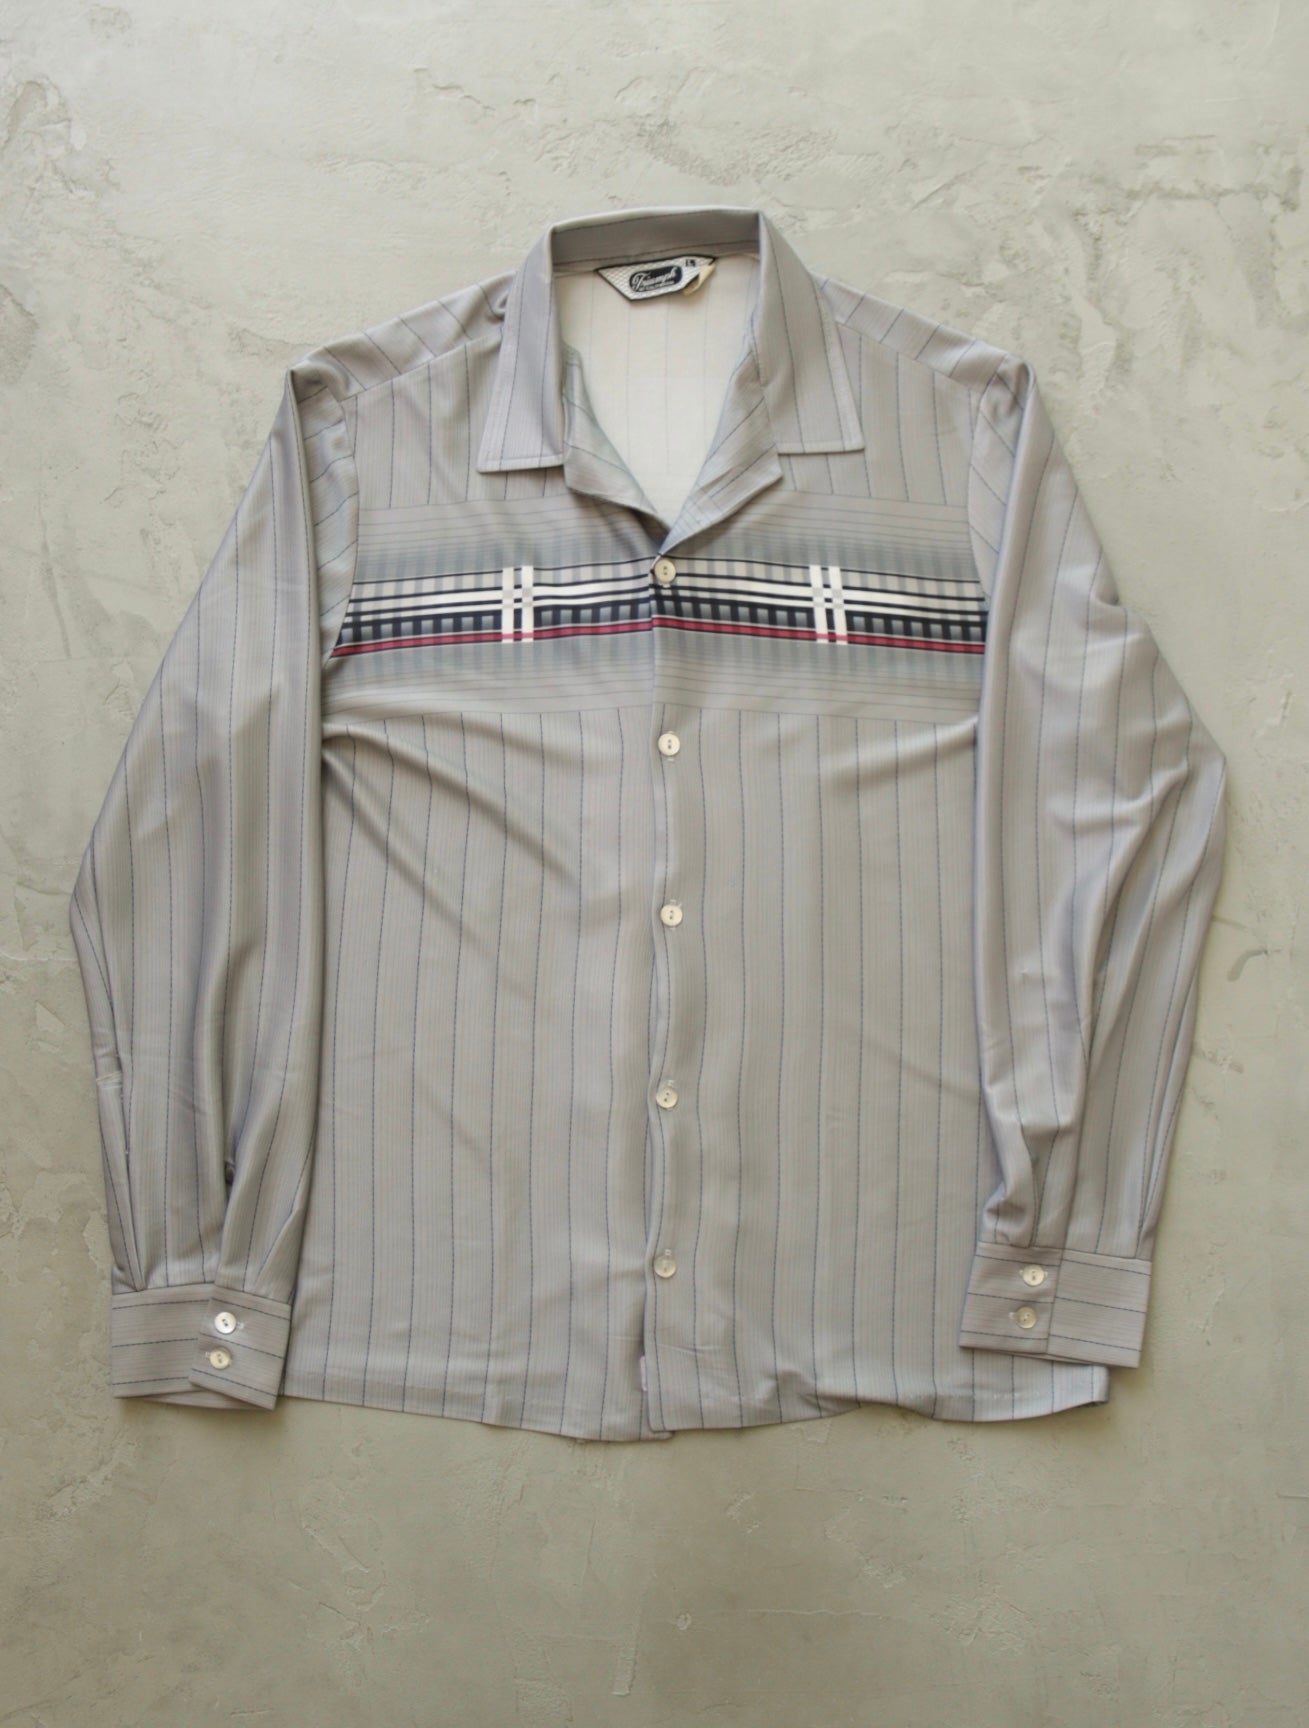 1980S GRAY BUTTON UP SHIRT - TWO FOLD